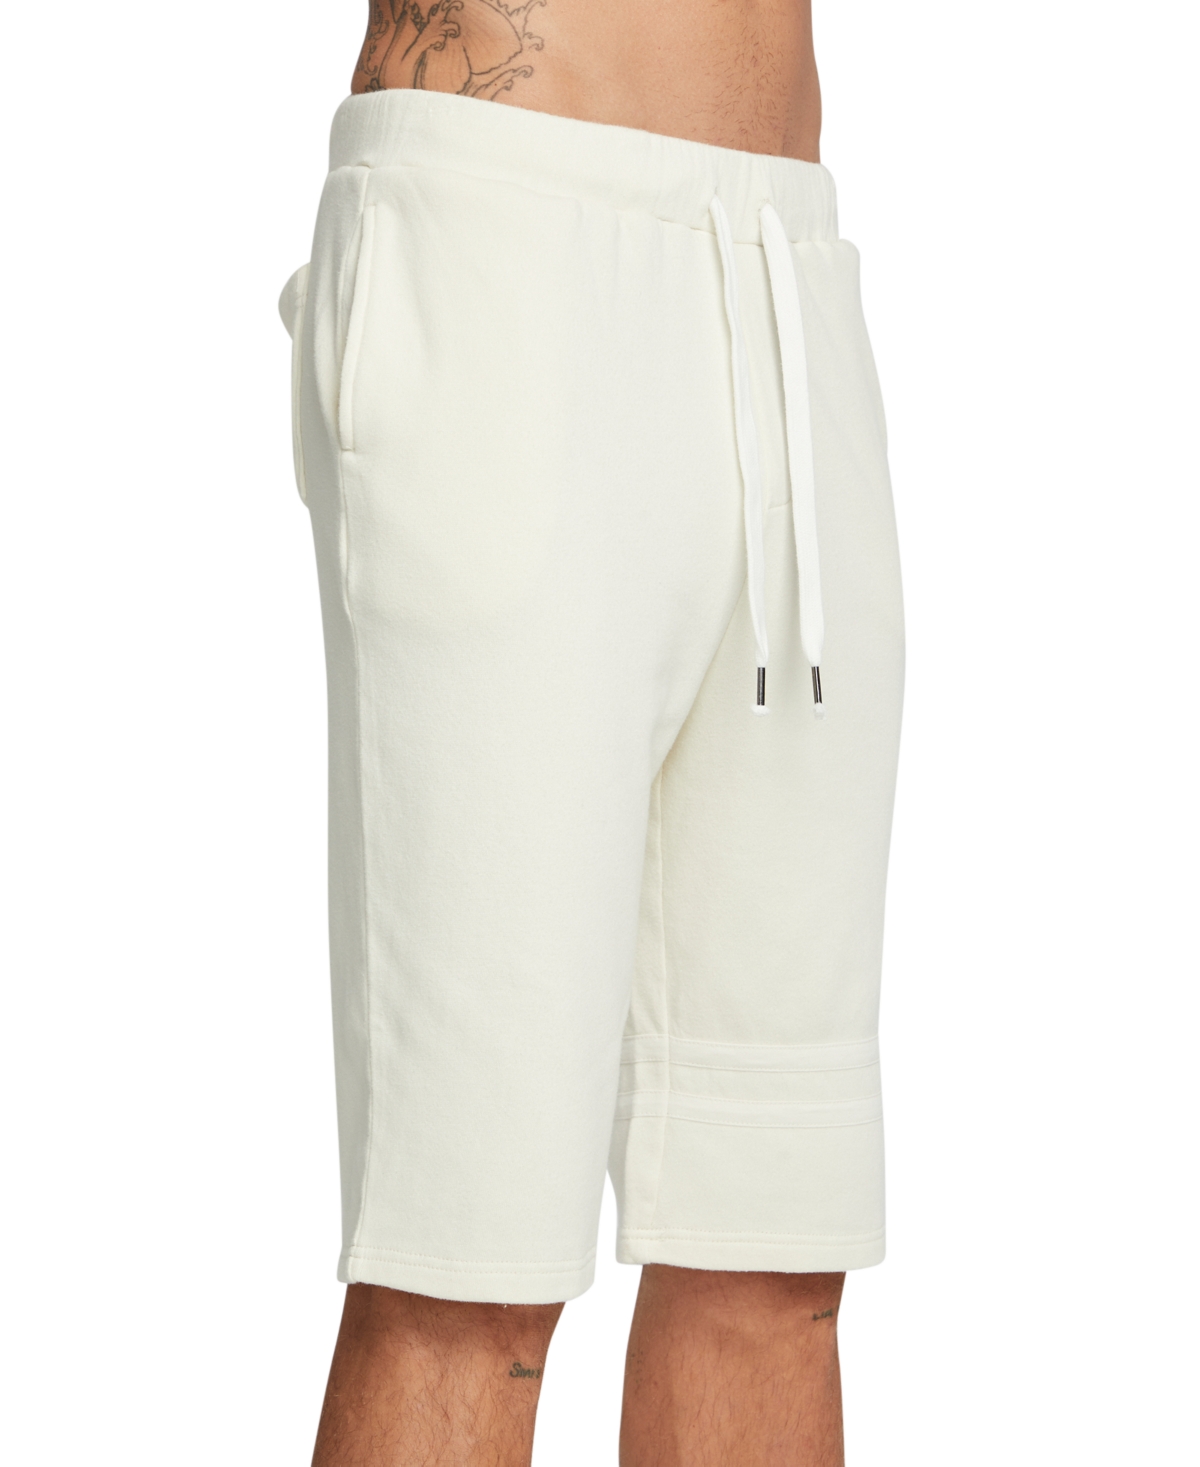 Chaser Men's Fleece Strapping Shorts